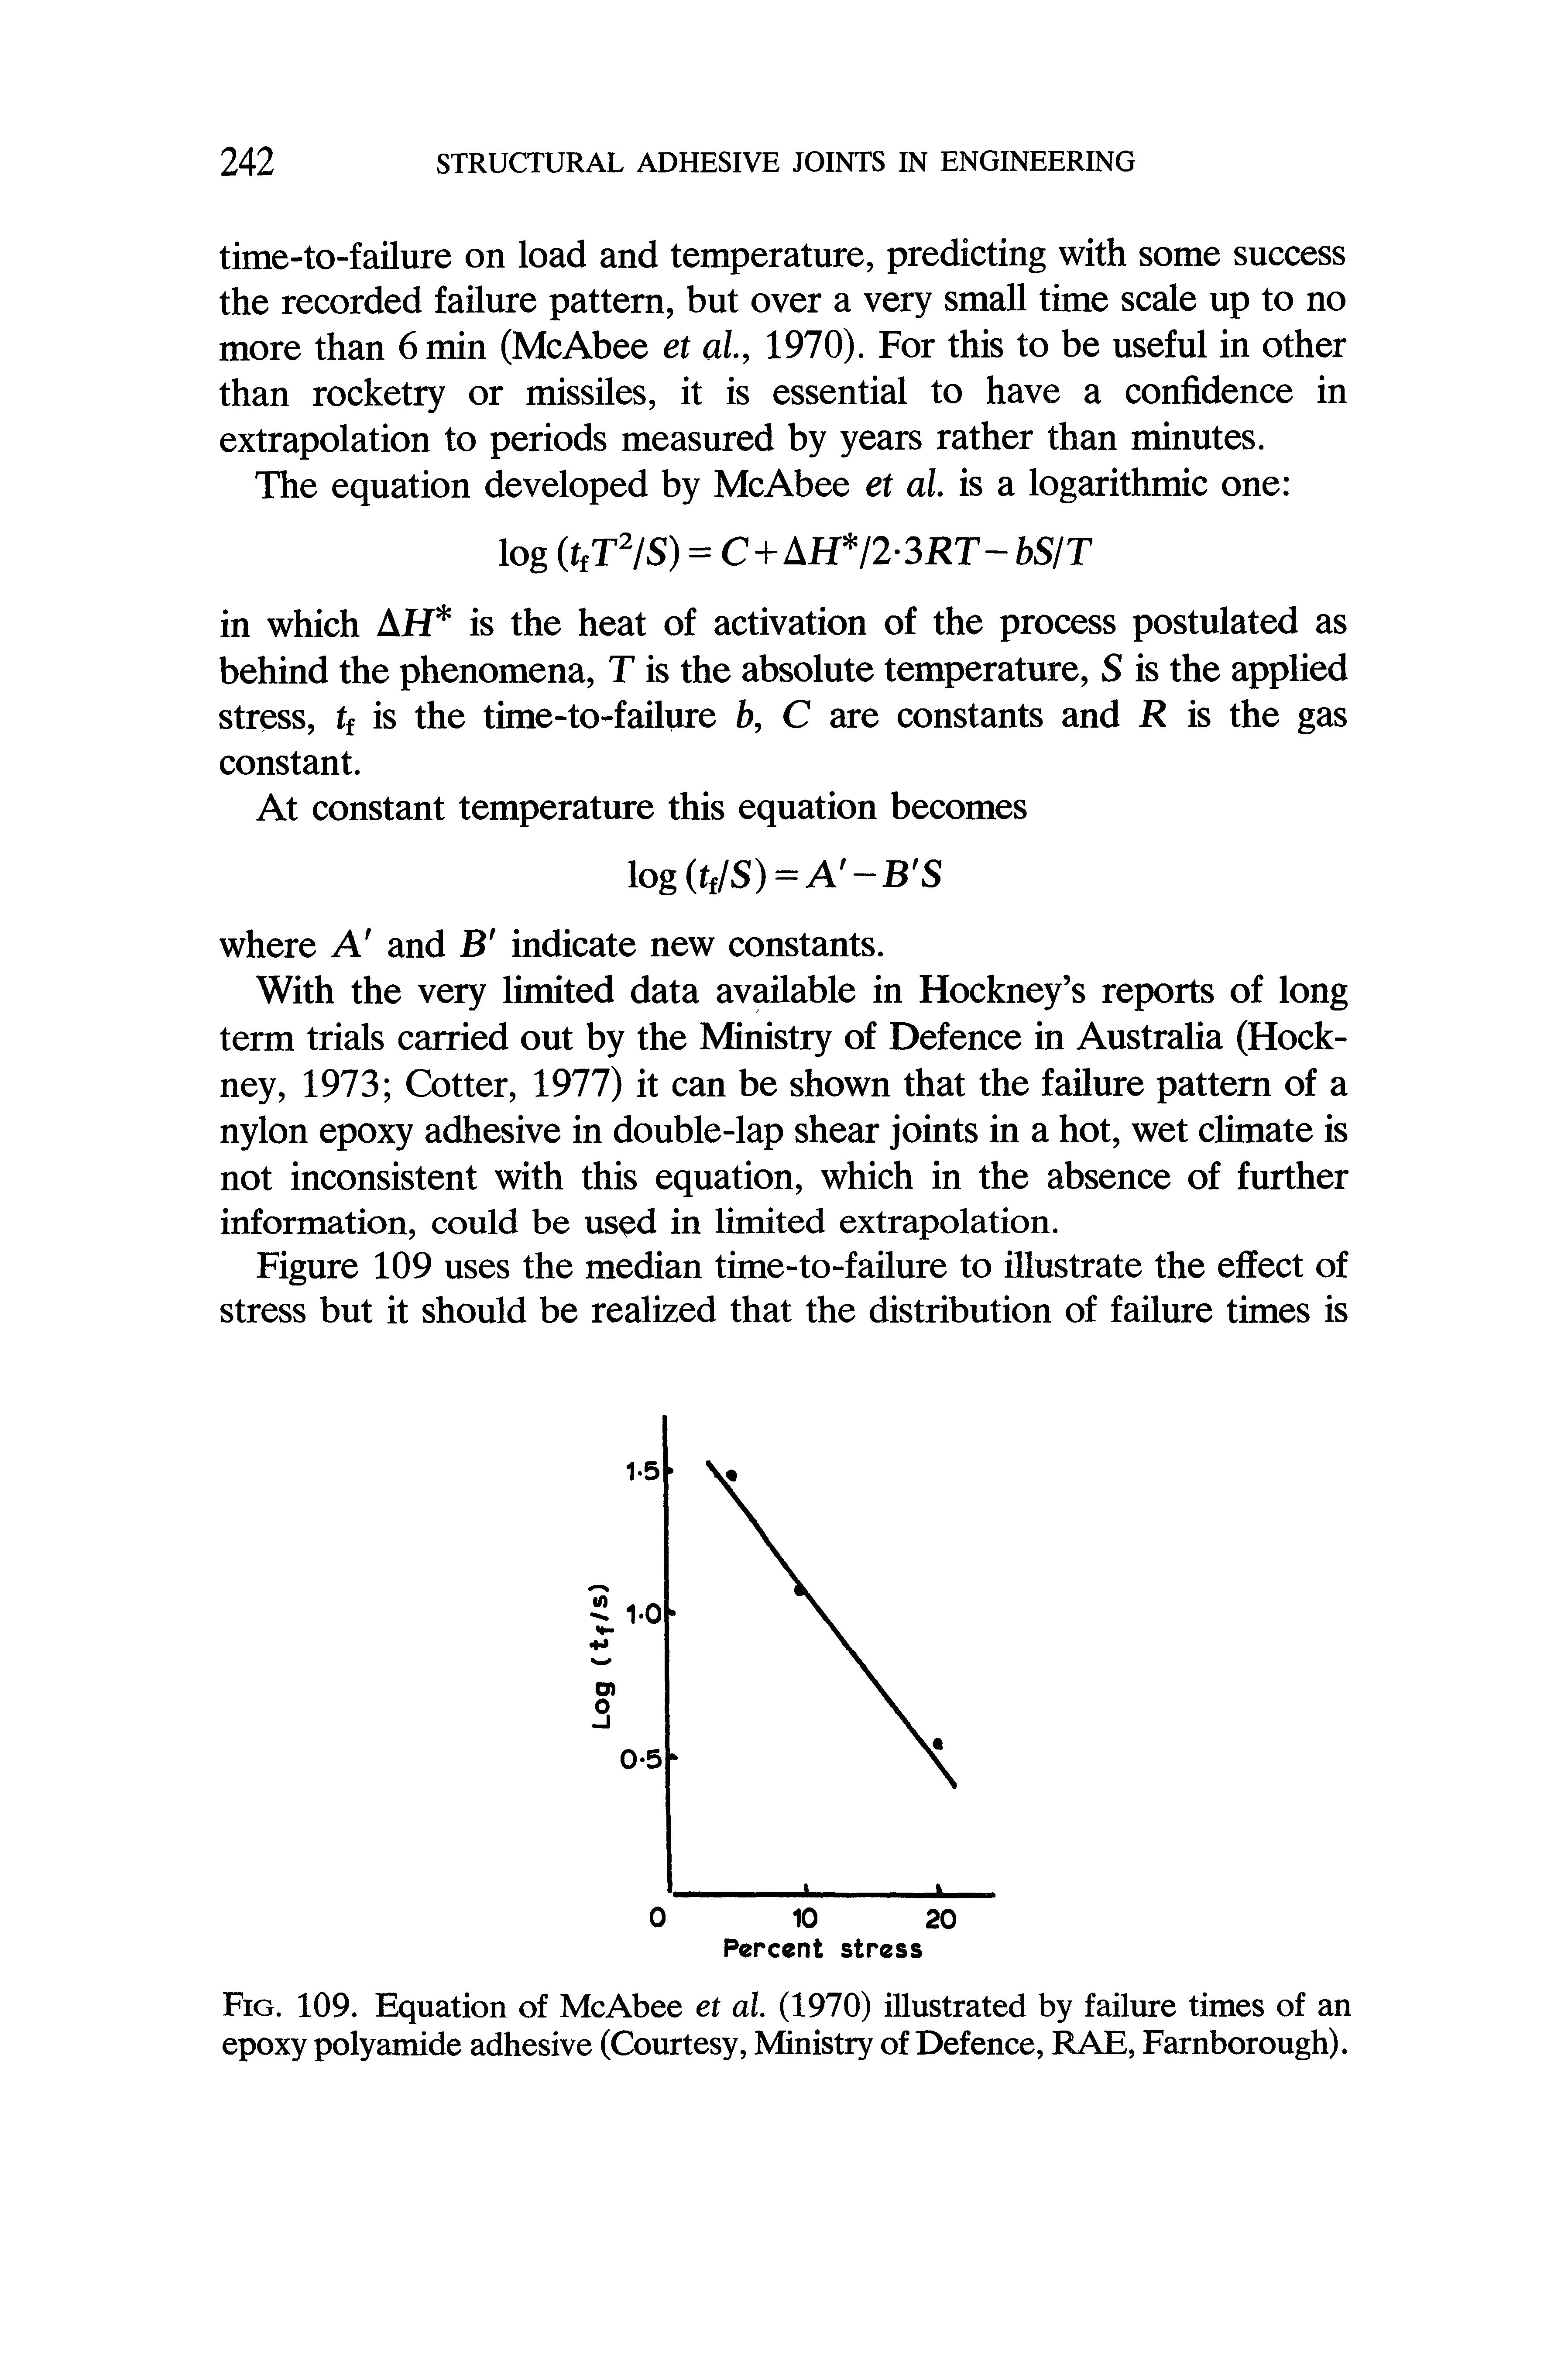 Fig. 109. Equation of McAbee et al. (1970) illustrated by failure times of an epoxy polyamide adhesive (Courtesy, Ministry of Defence, RAE, Famborough).